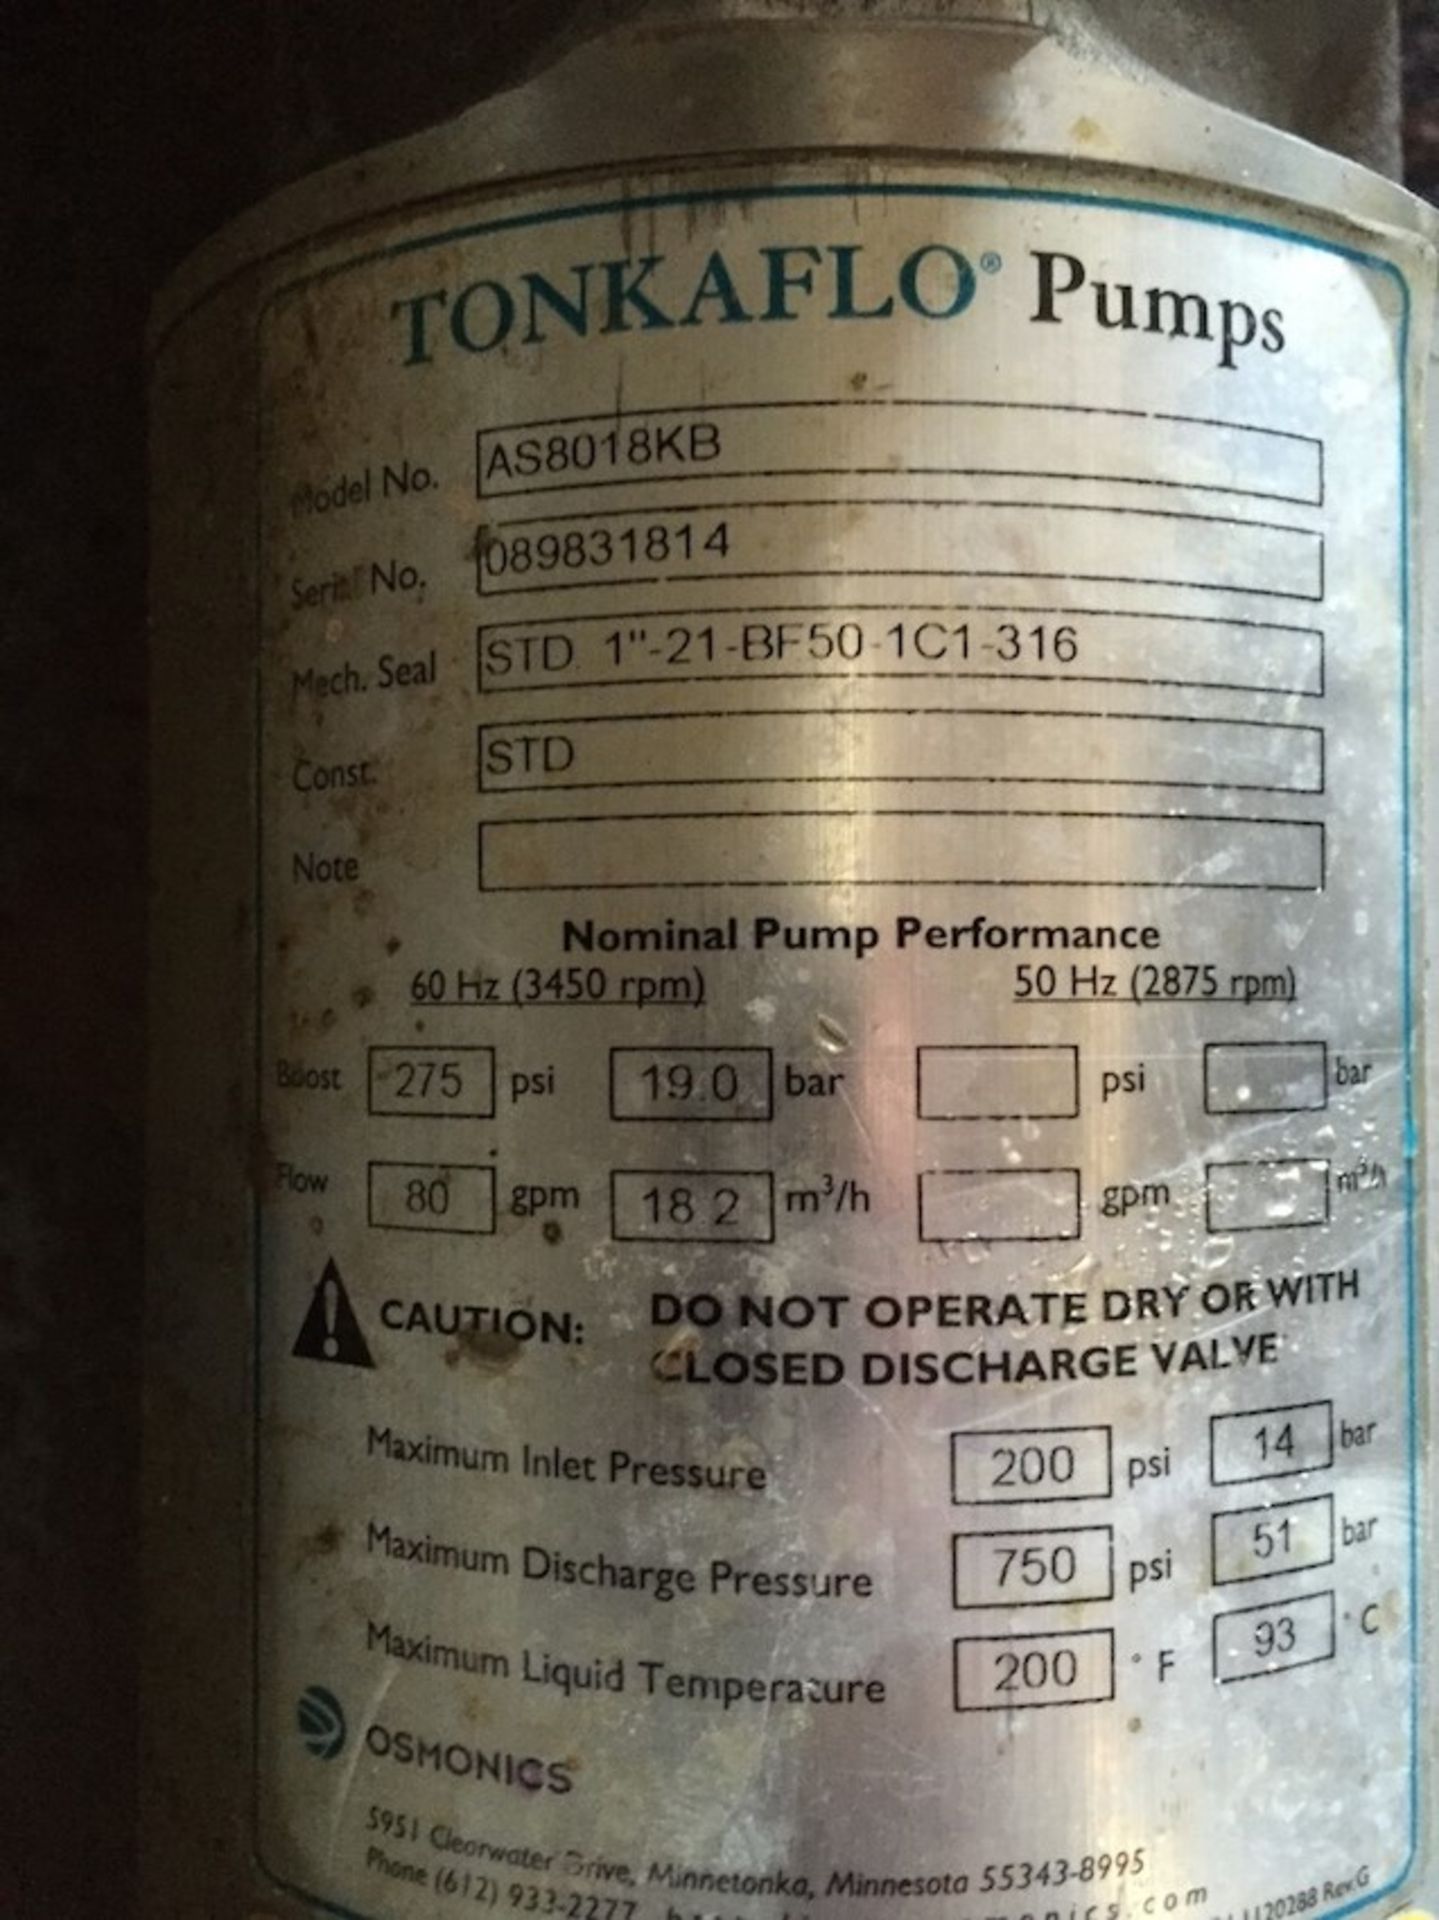 2-Tube RO System, Approx. 9" Tubes, 80 GPM, Equipped with Tonkaflow AS8018KB Pump, S/N 089831814, - Image 7 of 8